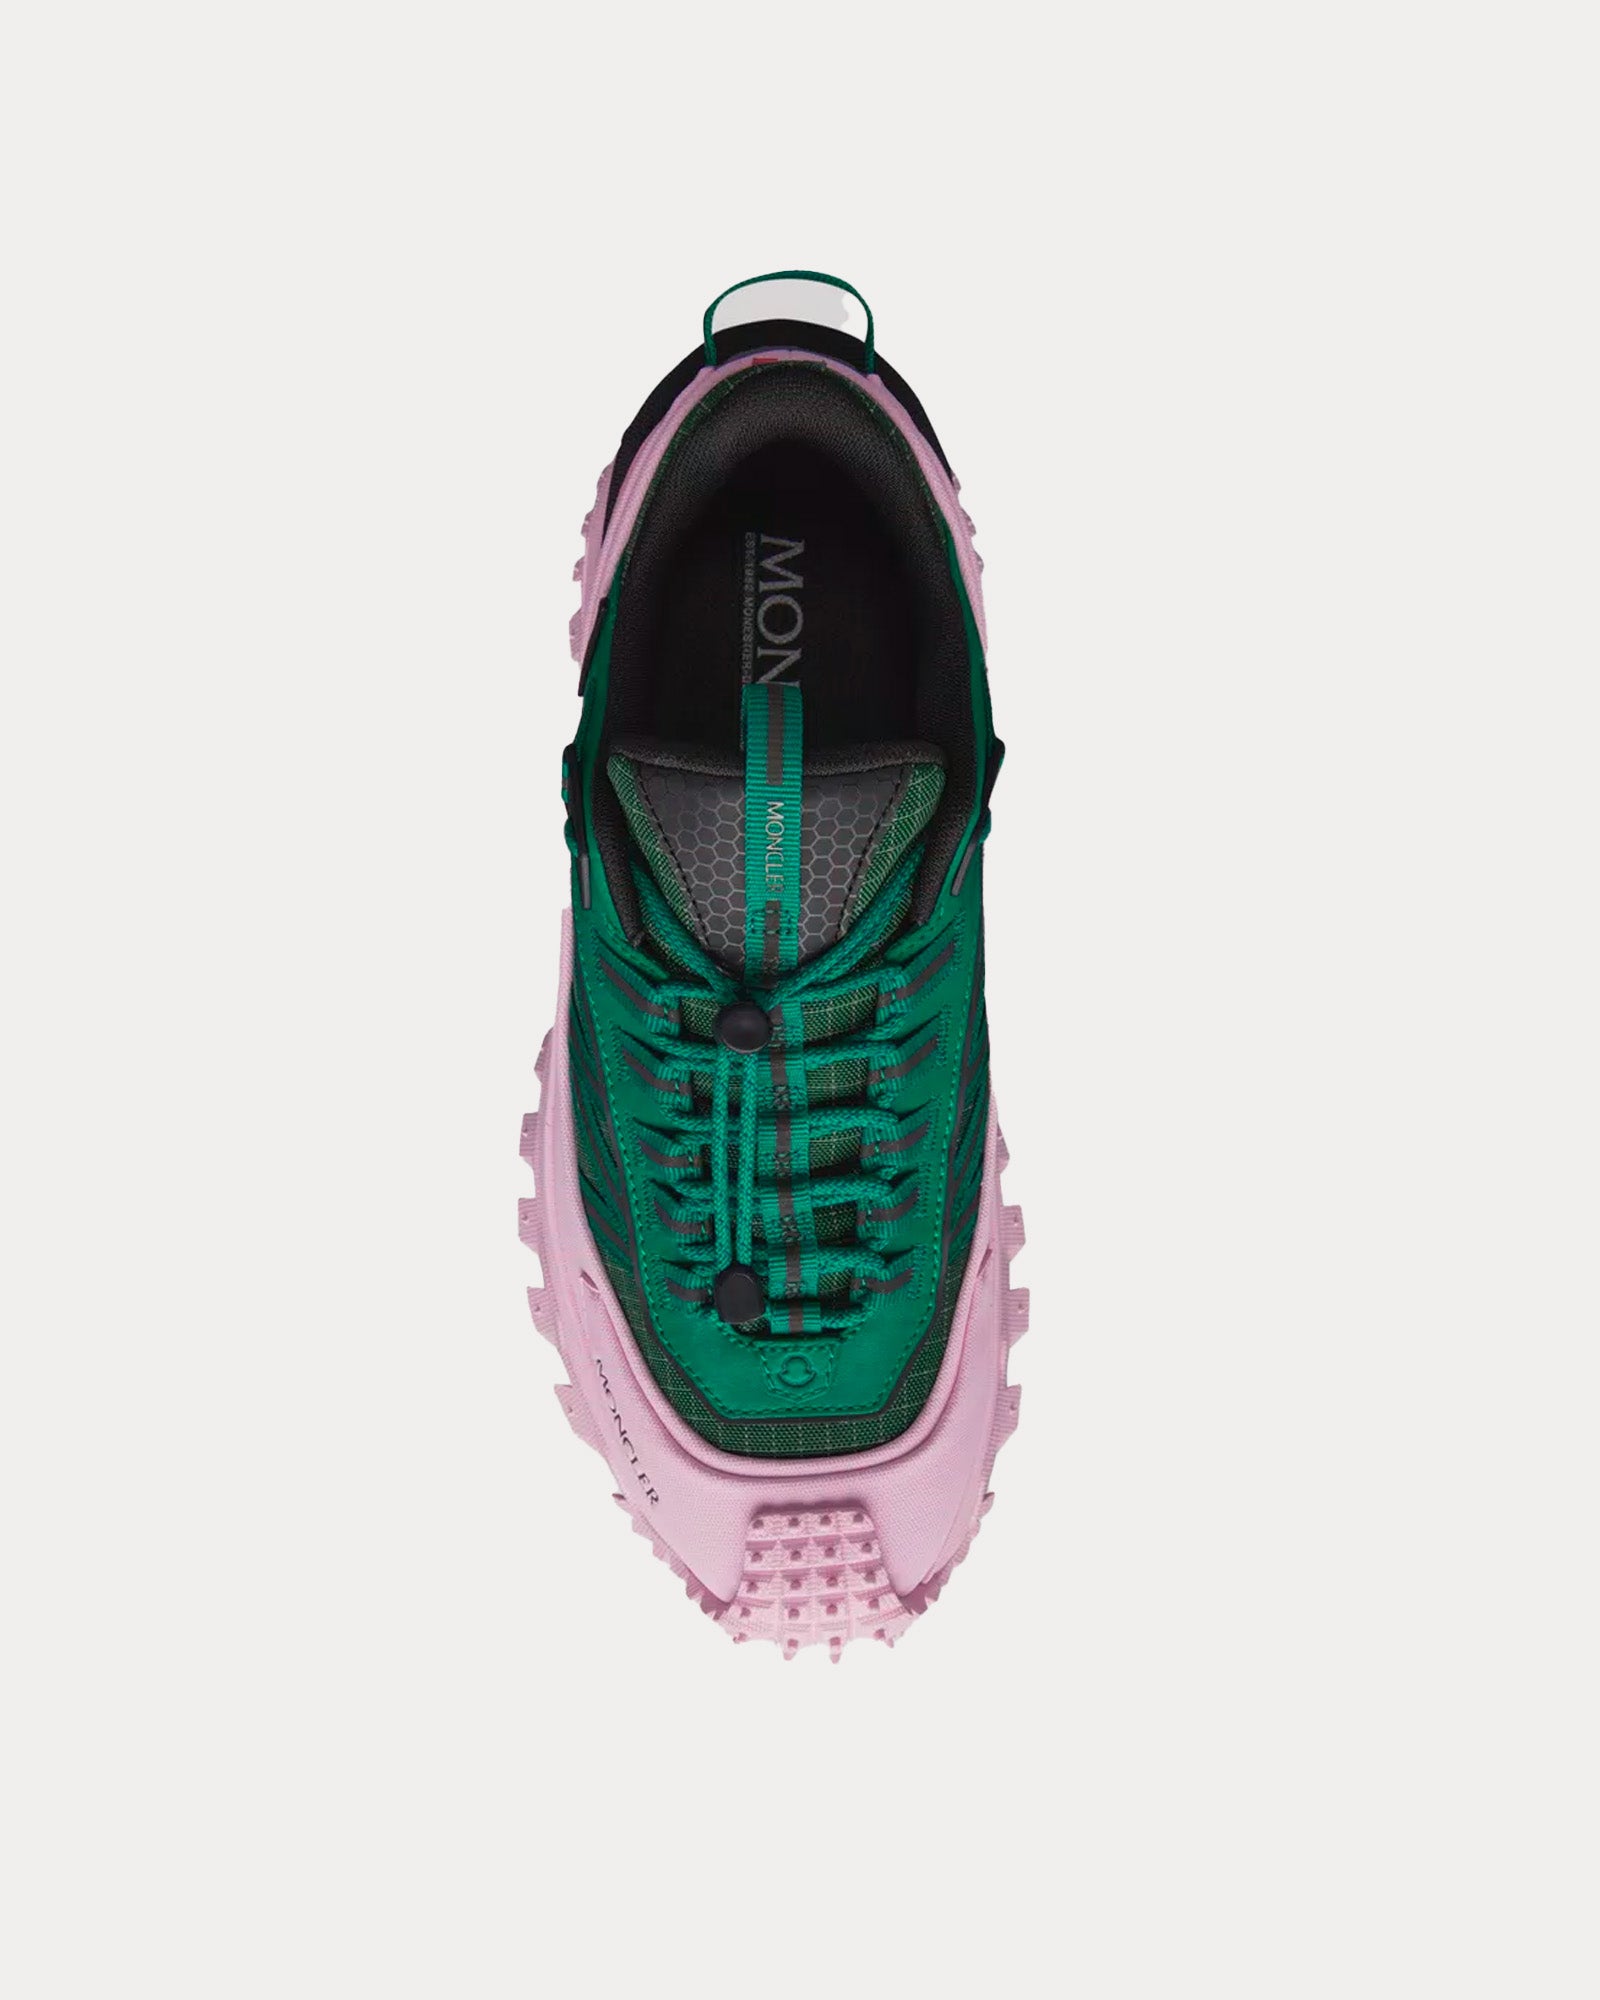 Moncler - Trailgrip GTX Pink / Green Low Top Sneakers